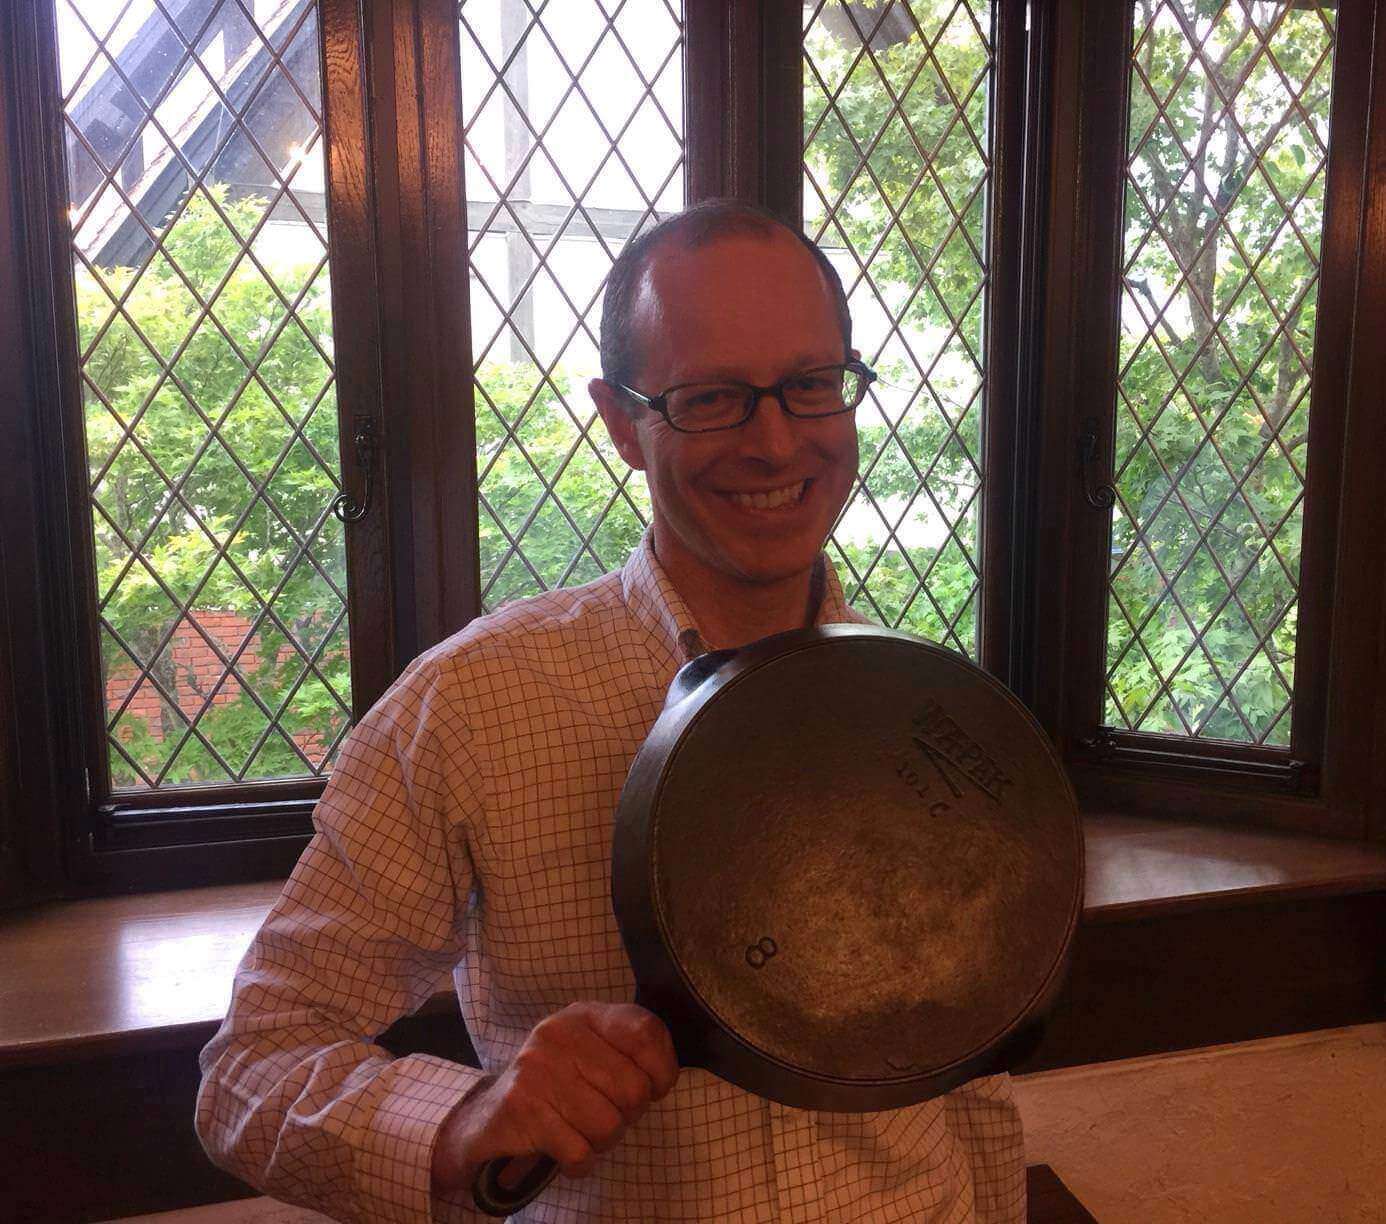 Brett from Boonie Hicks holding a vintage cast iron skillet made by Wapak Hollowware.